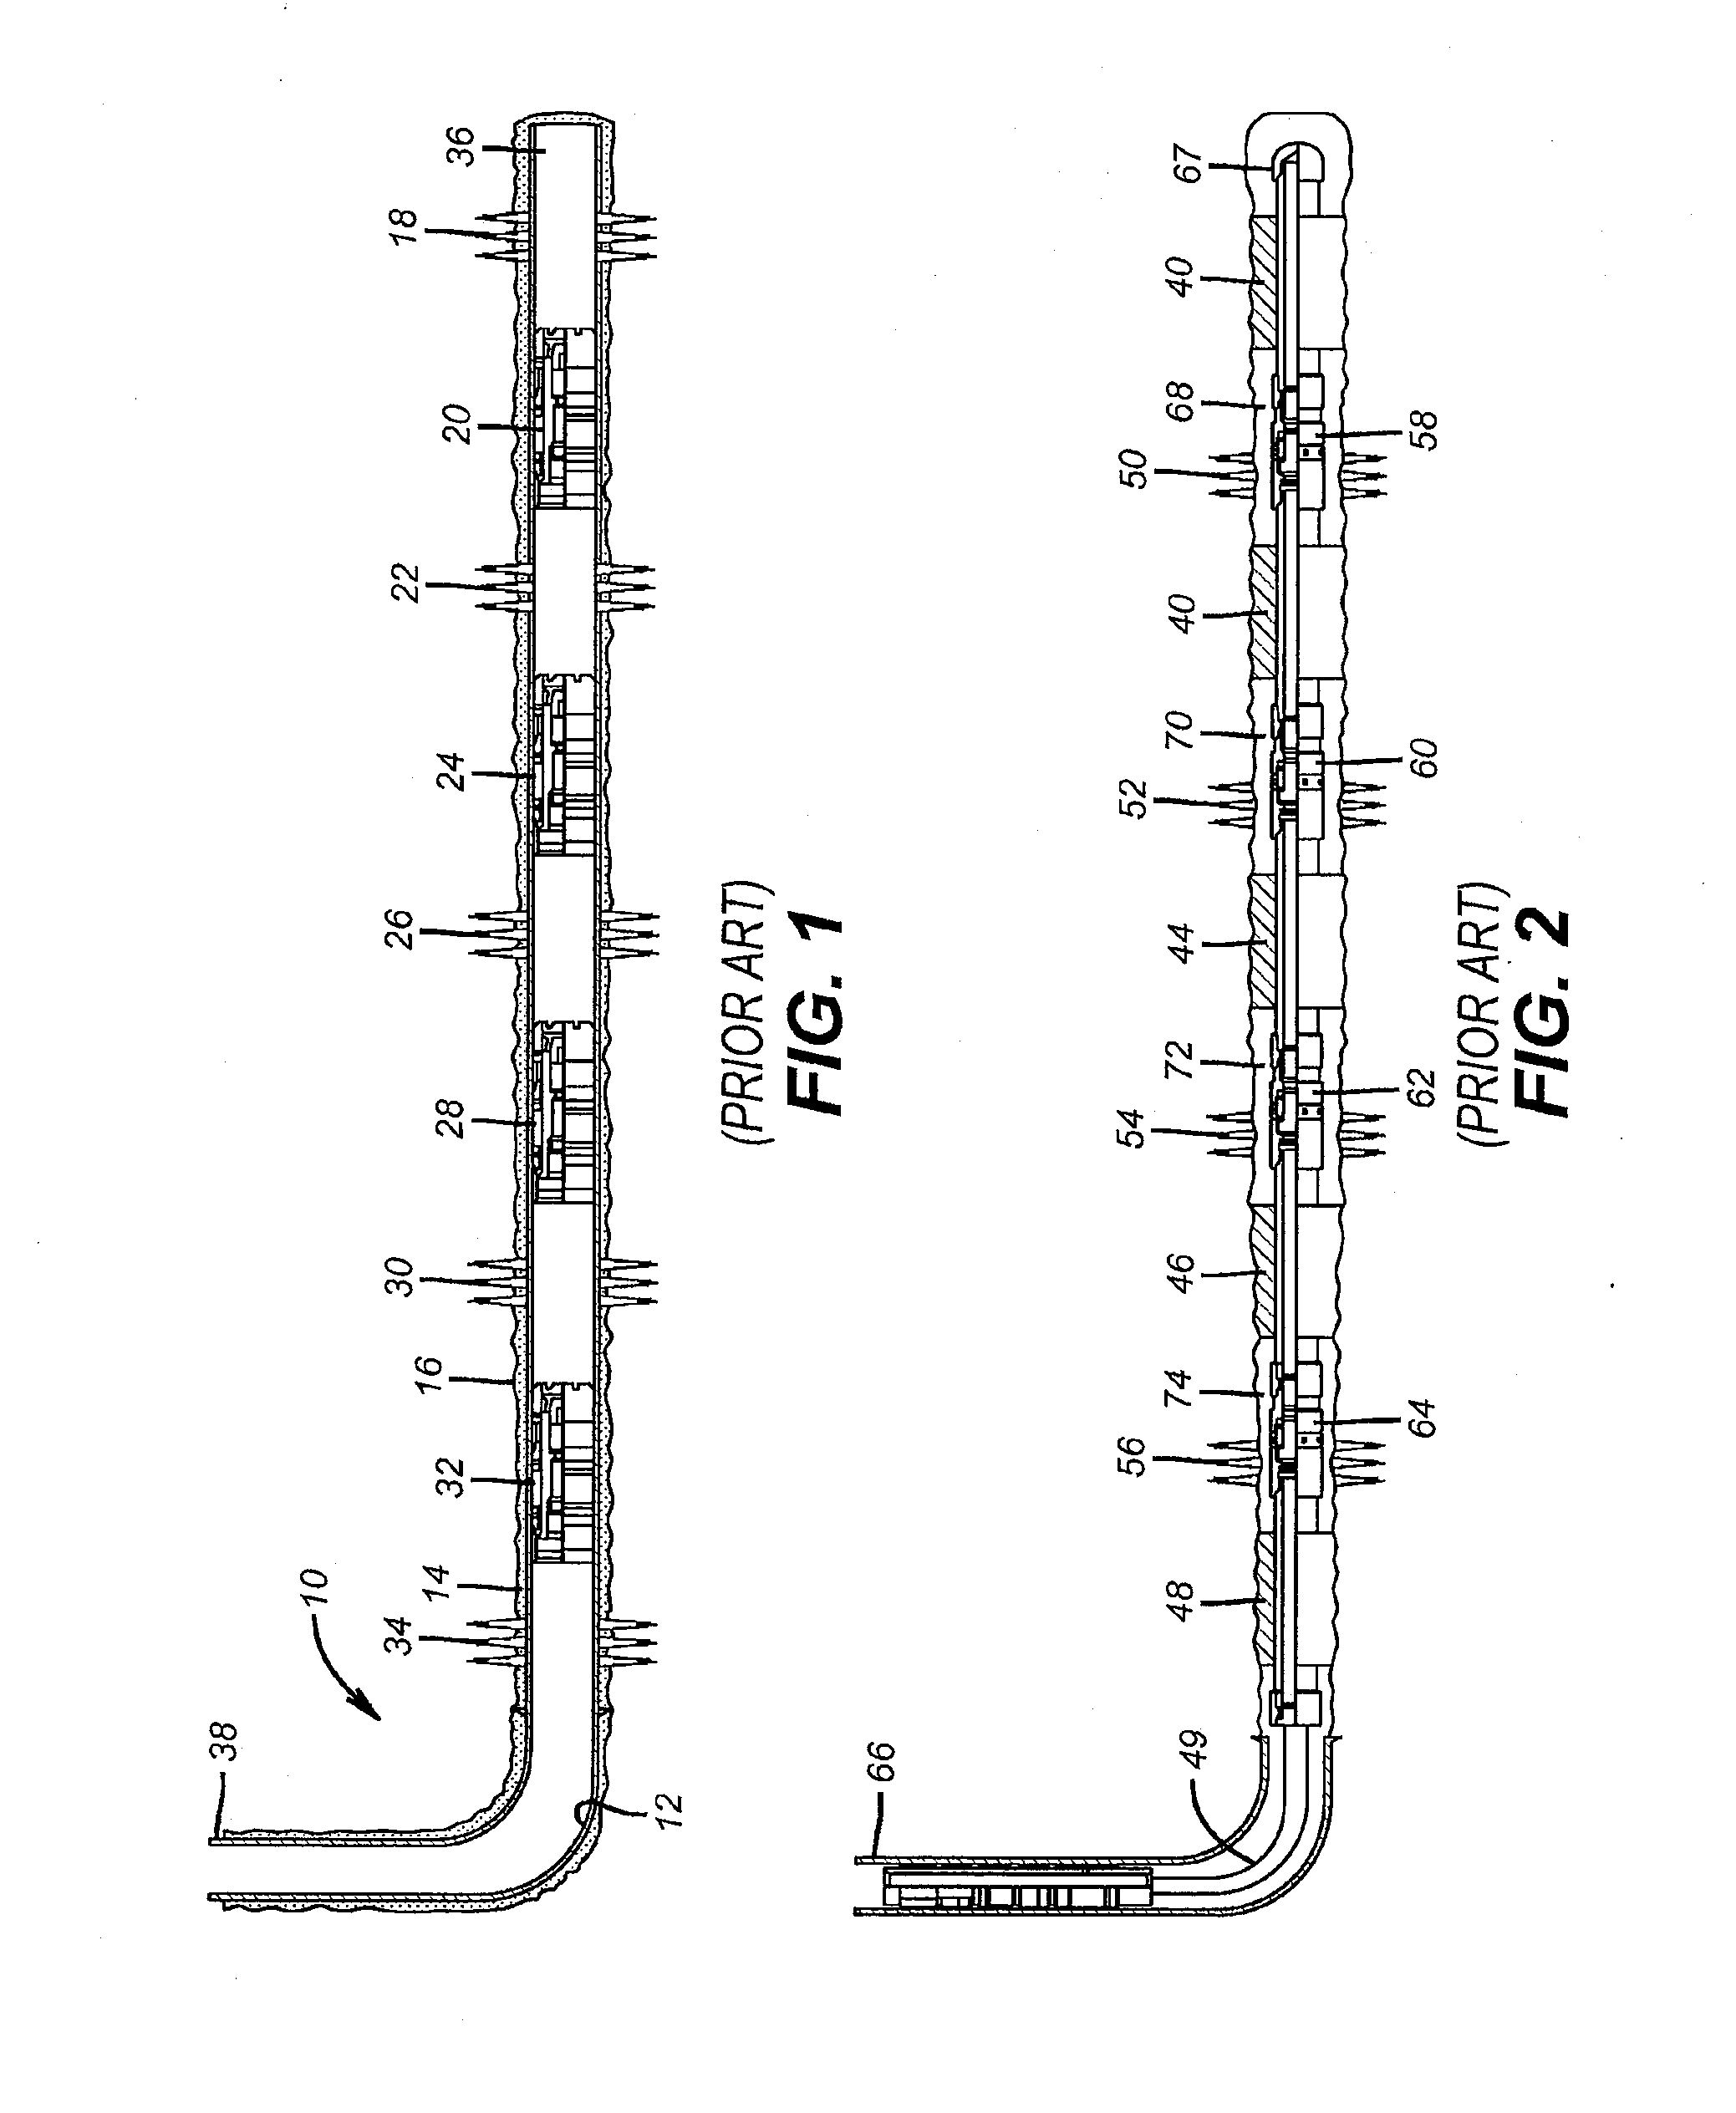 Method and system for hydraulic fracturing